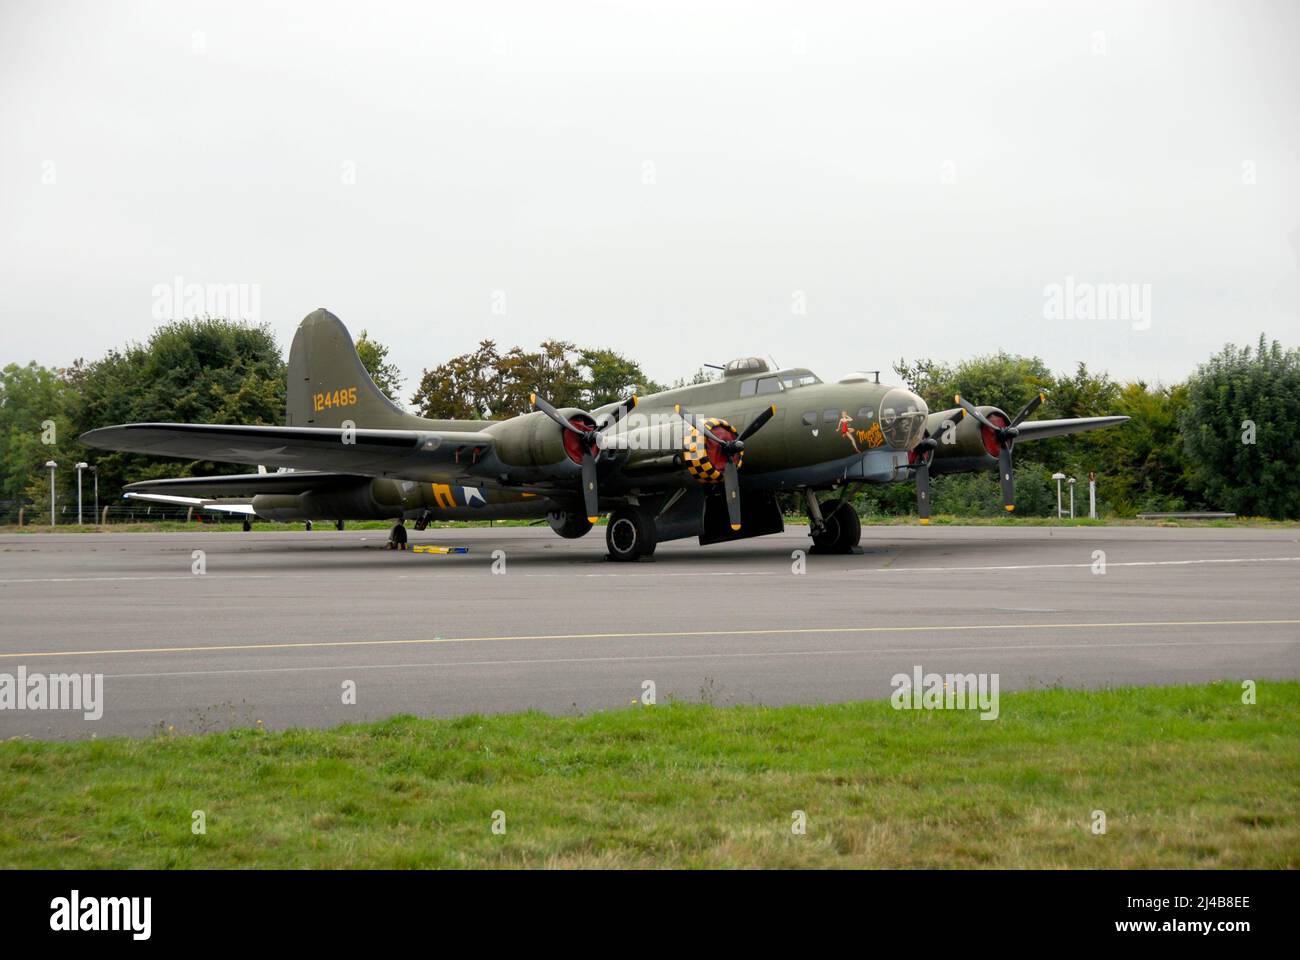 The Memphis Belle Boeing B-17F Flying Fortress used during the Second World War on display at an air show at Biggin Hill, Kent, England Stock Photo